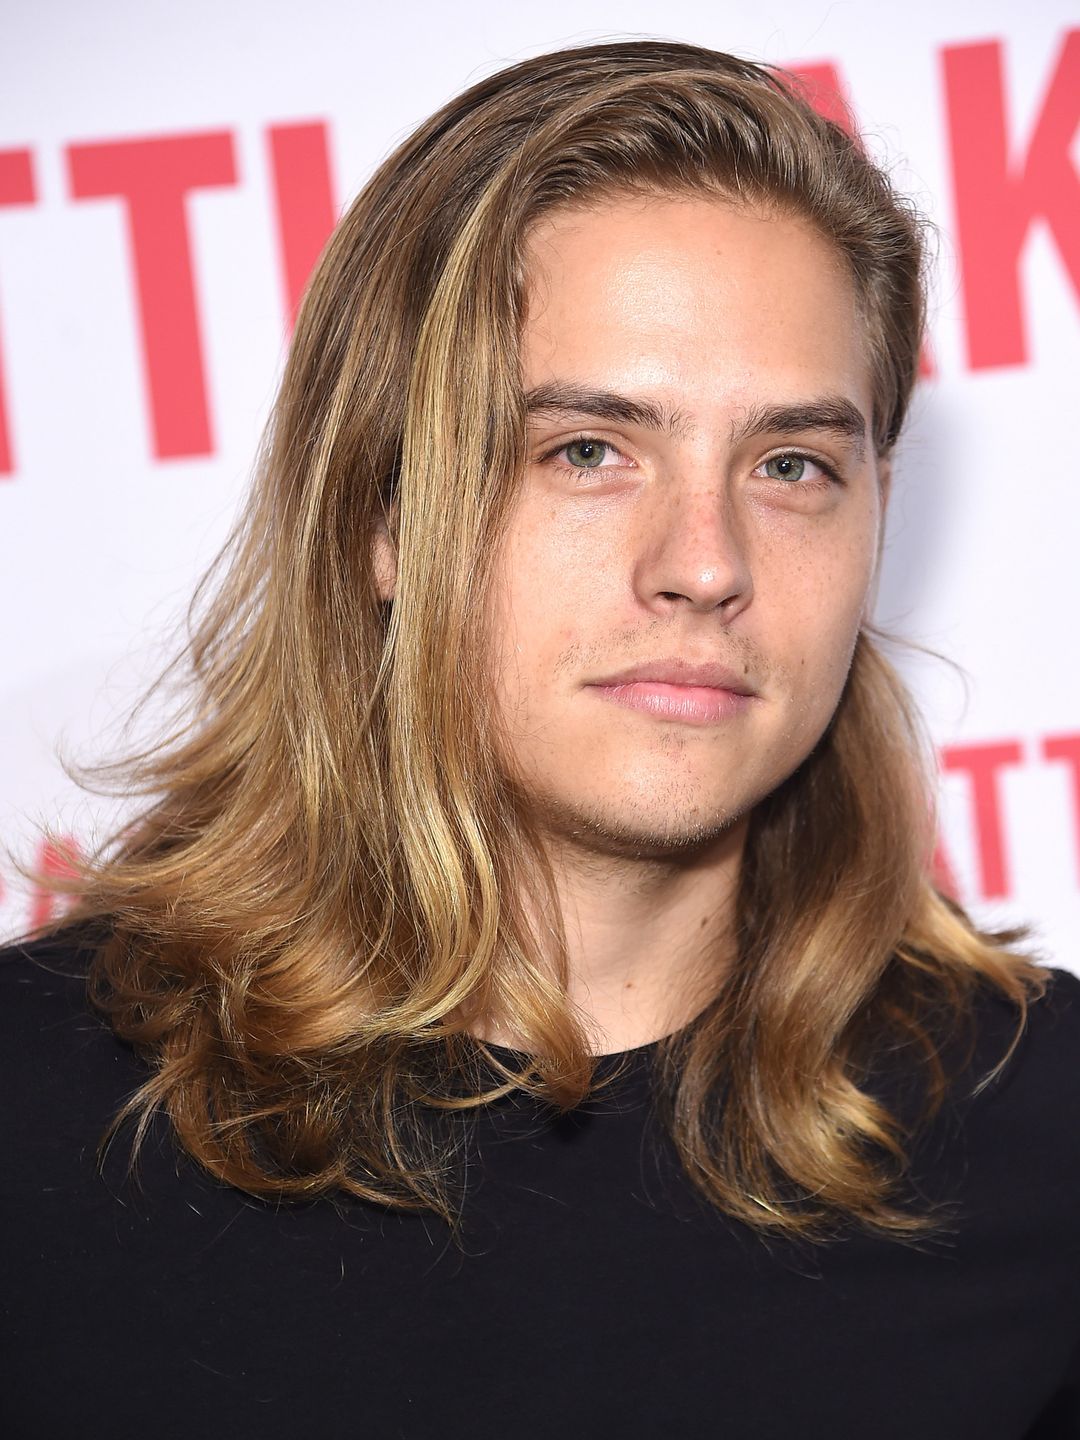 Dylan Sprouse family